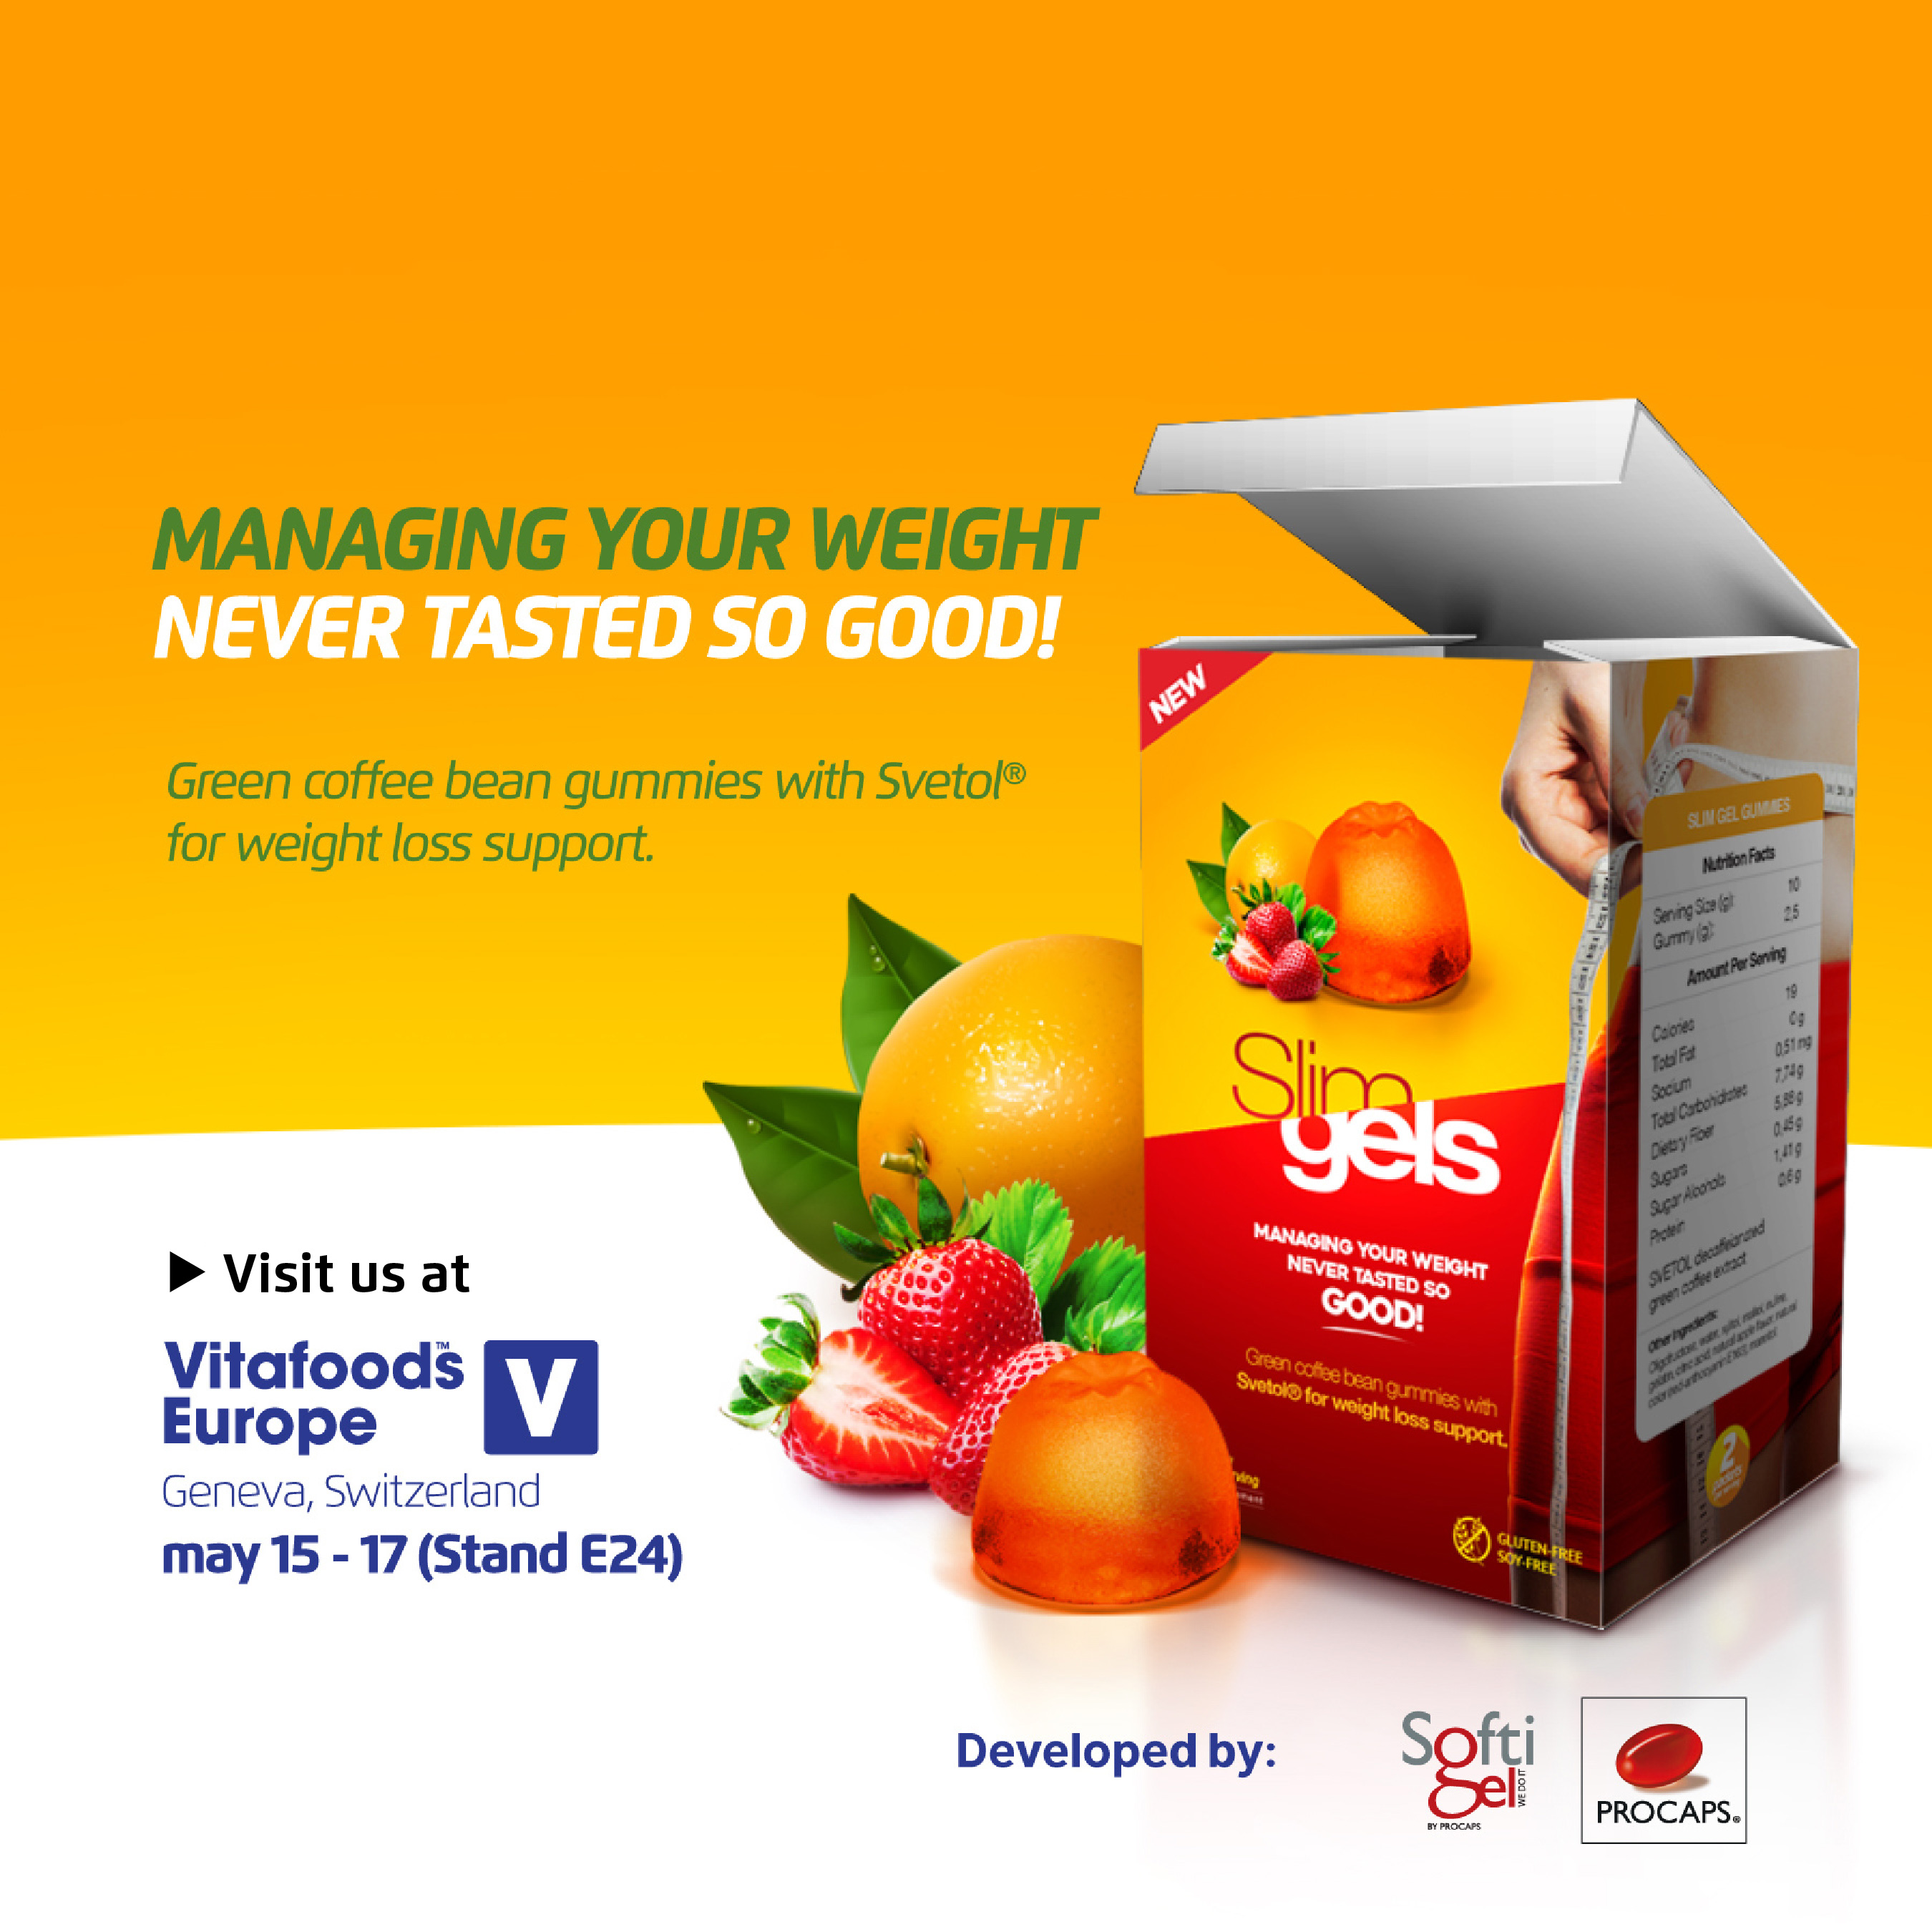 Managing your weight never tasted so good! New weight loss gummies,Visit us at booth E24 at Vitafoods 2018